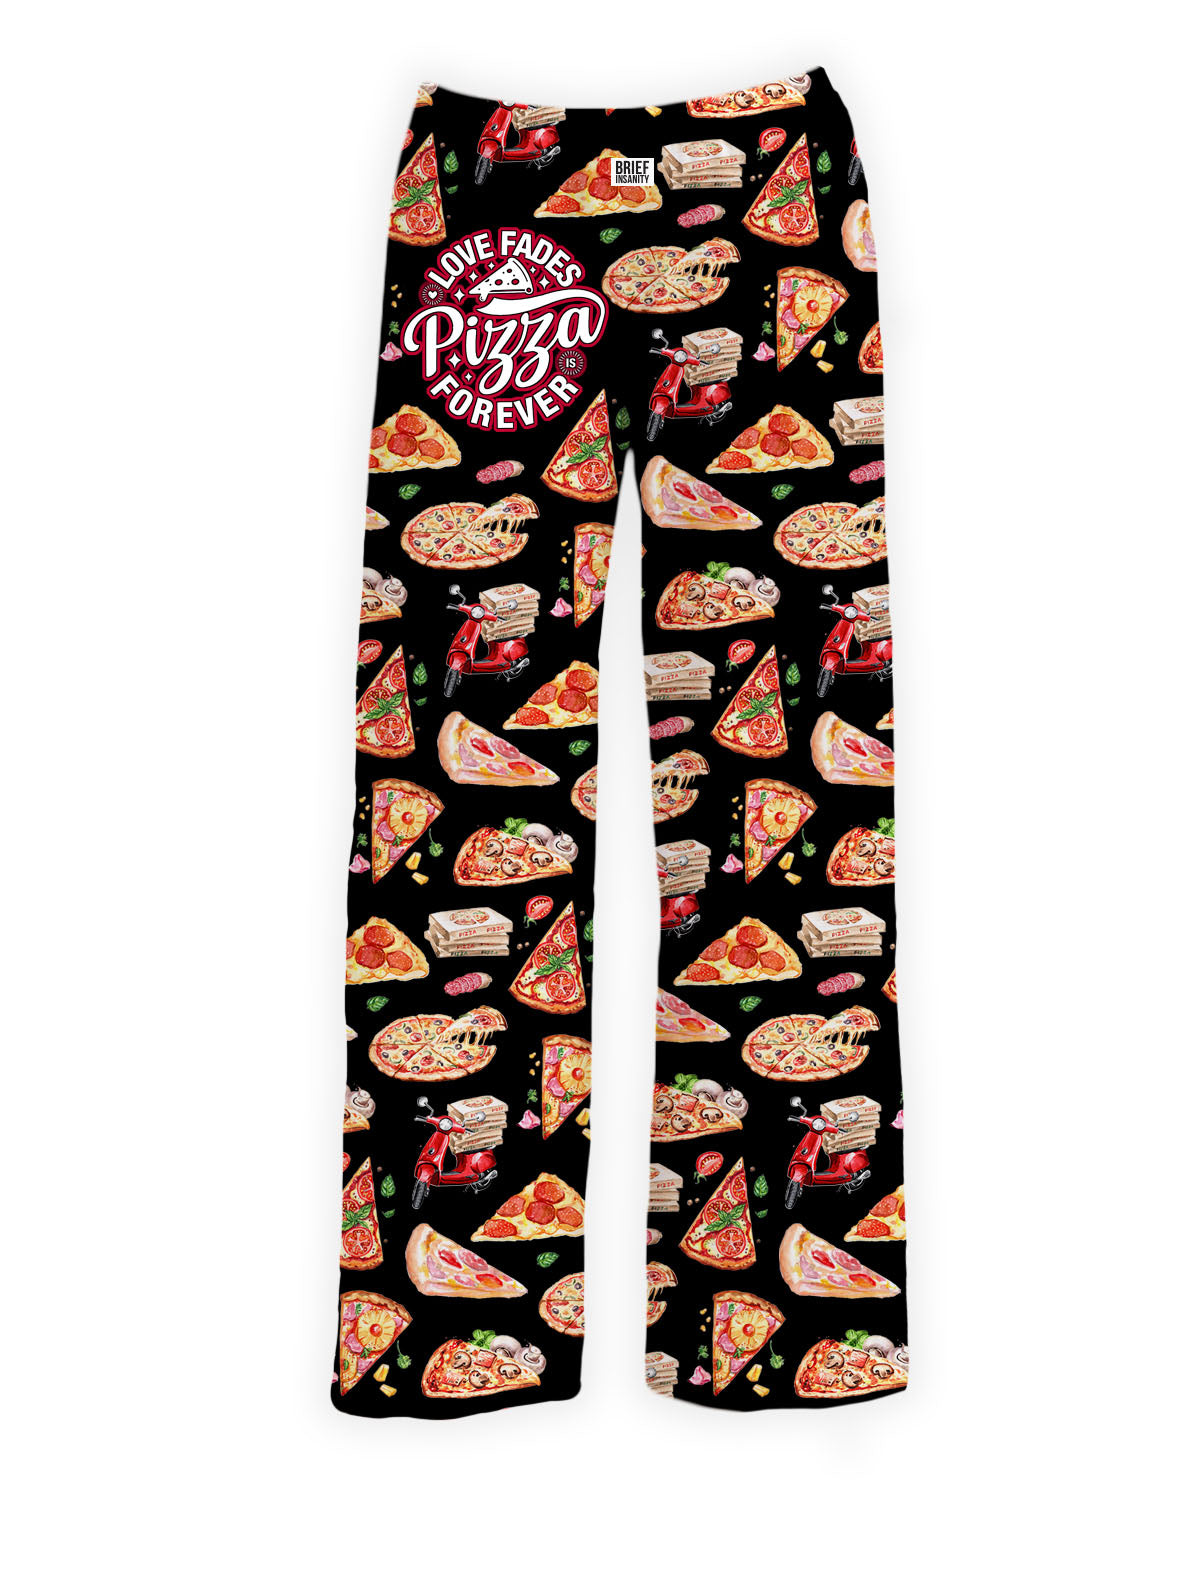 BRIEF INSANITY Pizza is Forever Pajama Lounge Pants